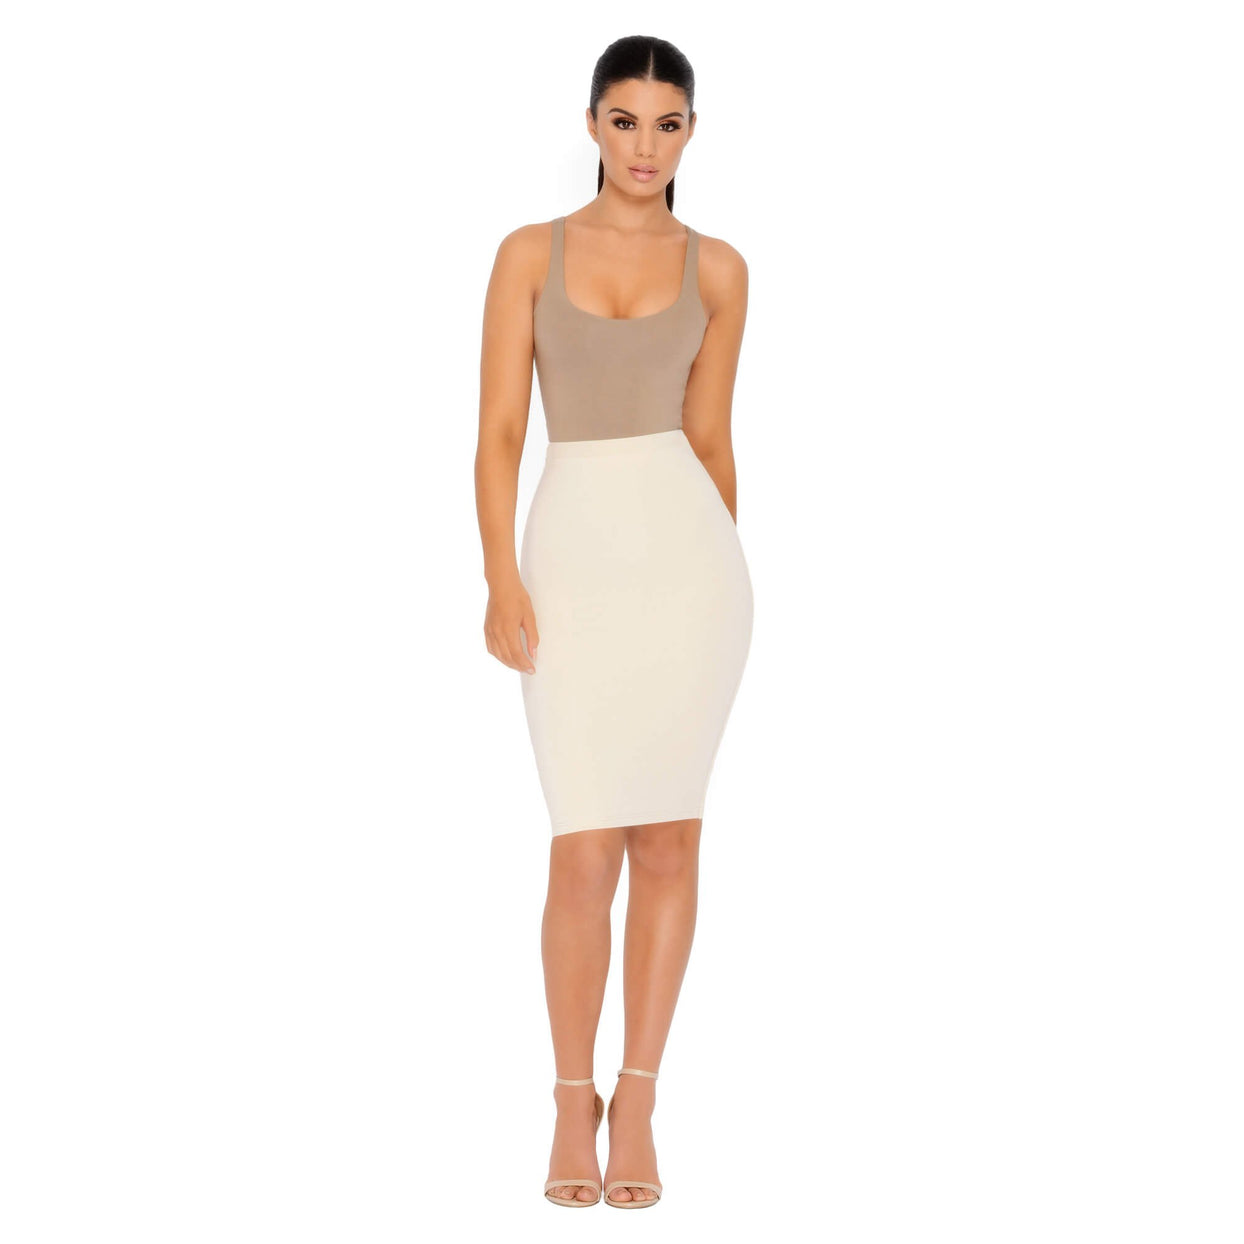 Number 1 Fit Double Layered Midi Skirt in Cream